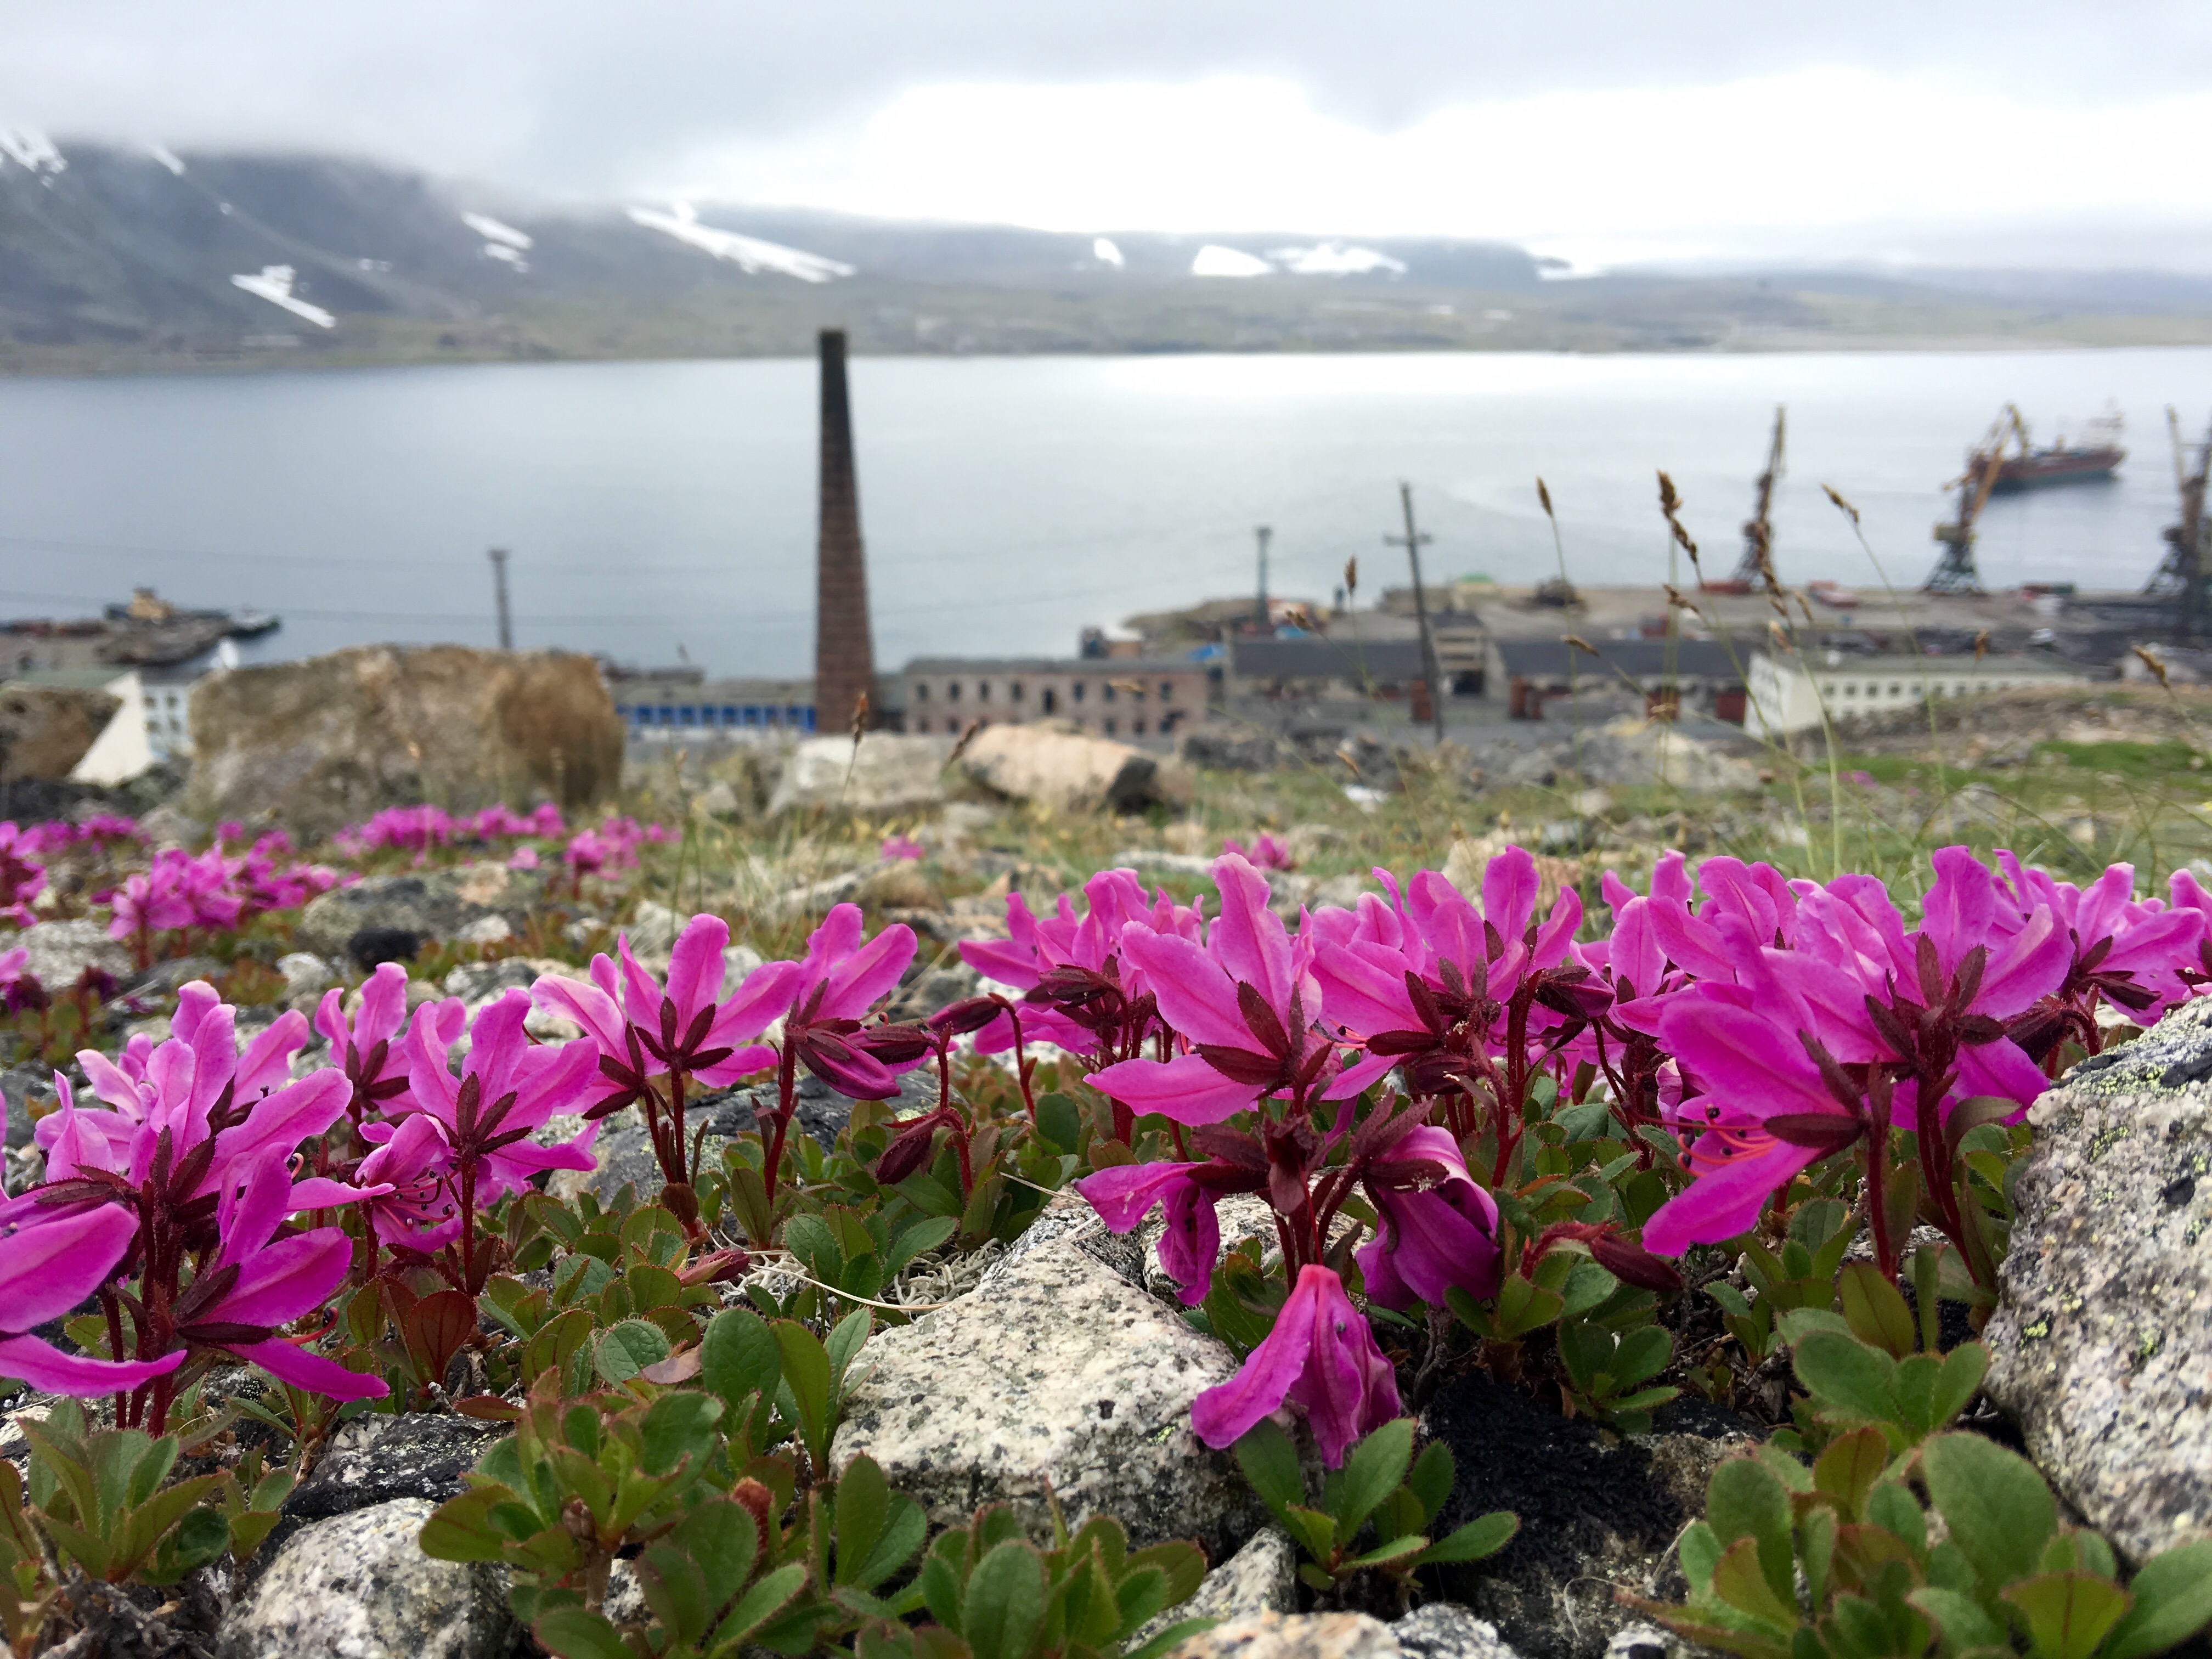 Mini-fireweed grows in abundance on a hillside above Provideniya, Chukotka, in late June 2016. Provideniya, called “Gateway to the Arctic,” is less than an hour’s flight from Nome. (Kirsten Swann / Alaska Dispatch News)